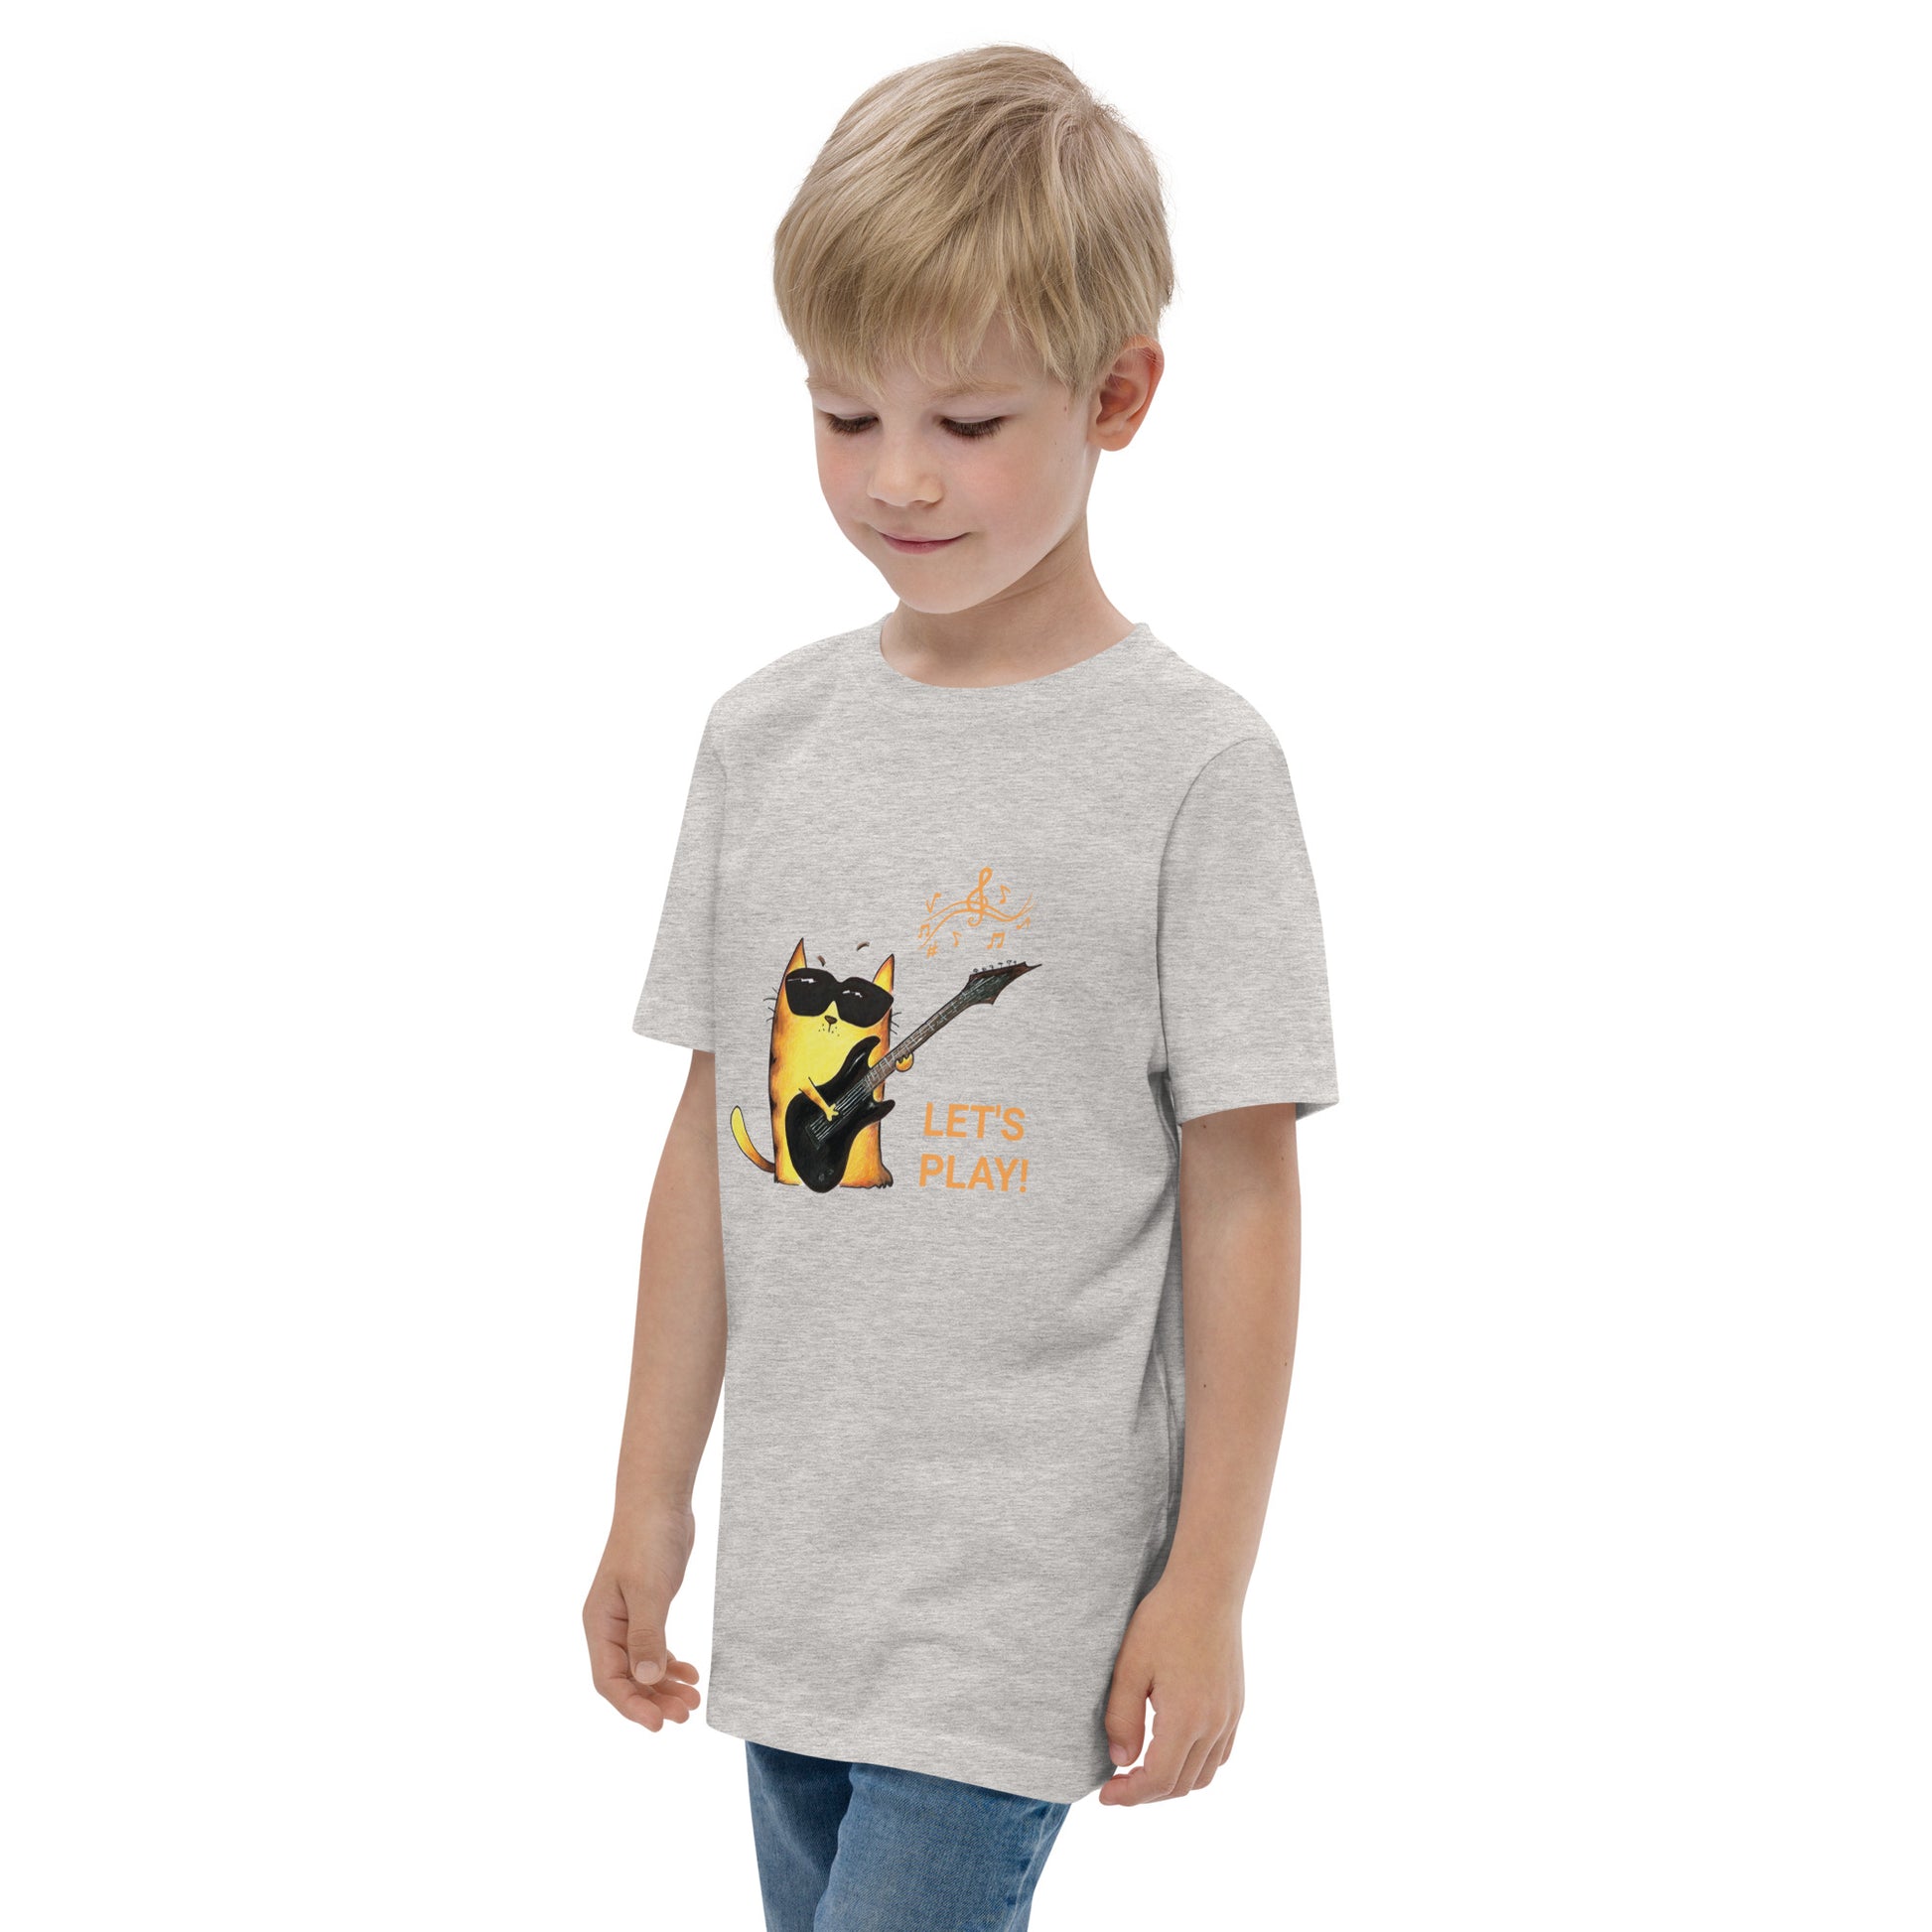 youth gray t shirt with cat print